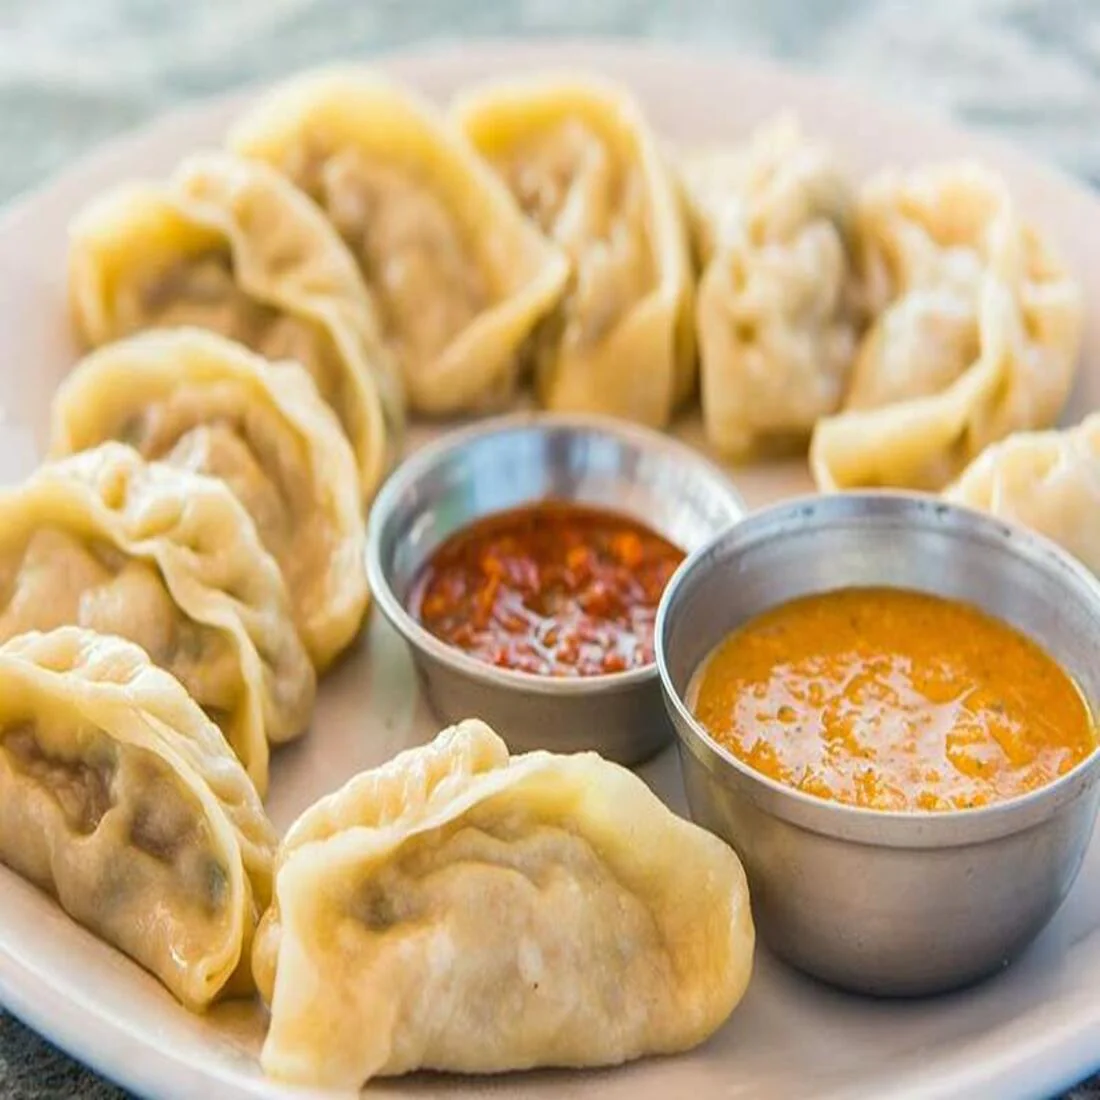 Chef expertly folding and pleating momo dough around a savory filling, creating perfectly shaped dumplings.